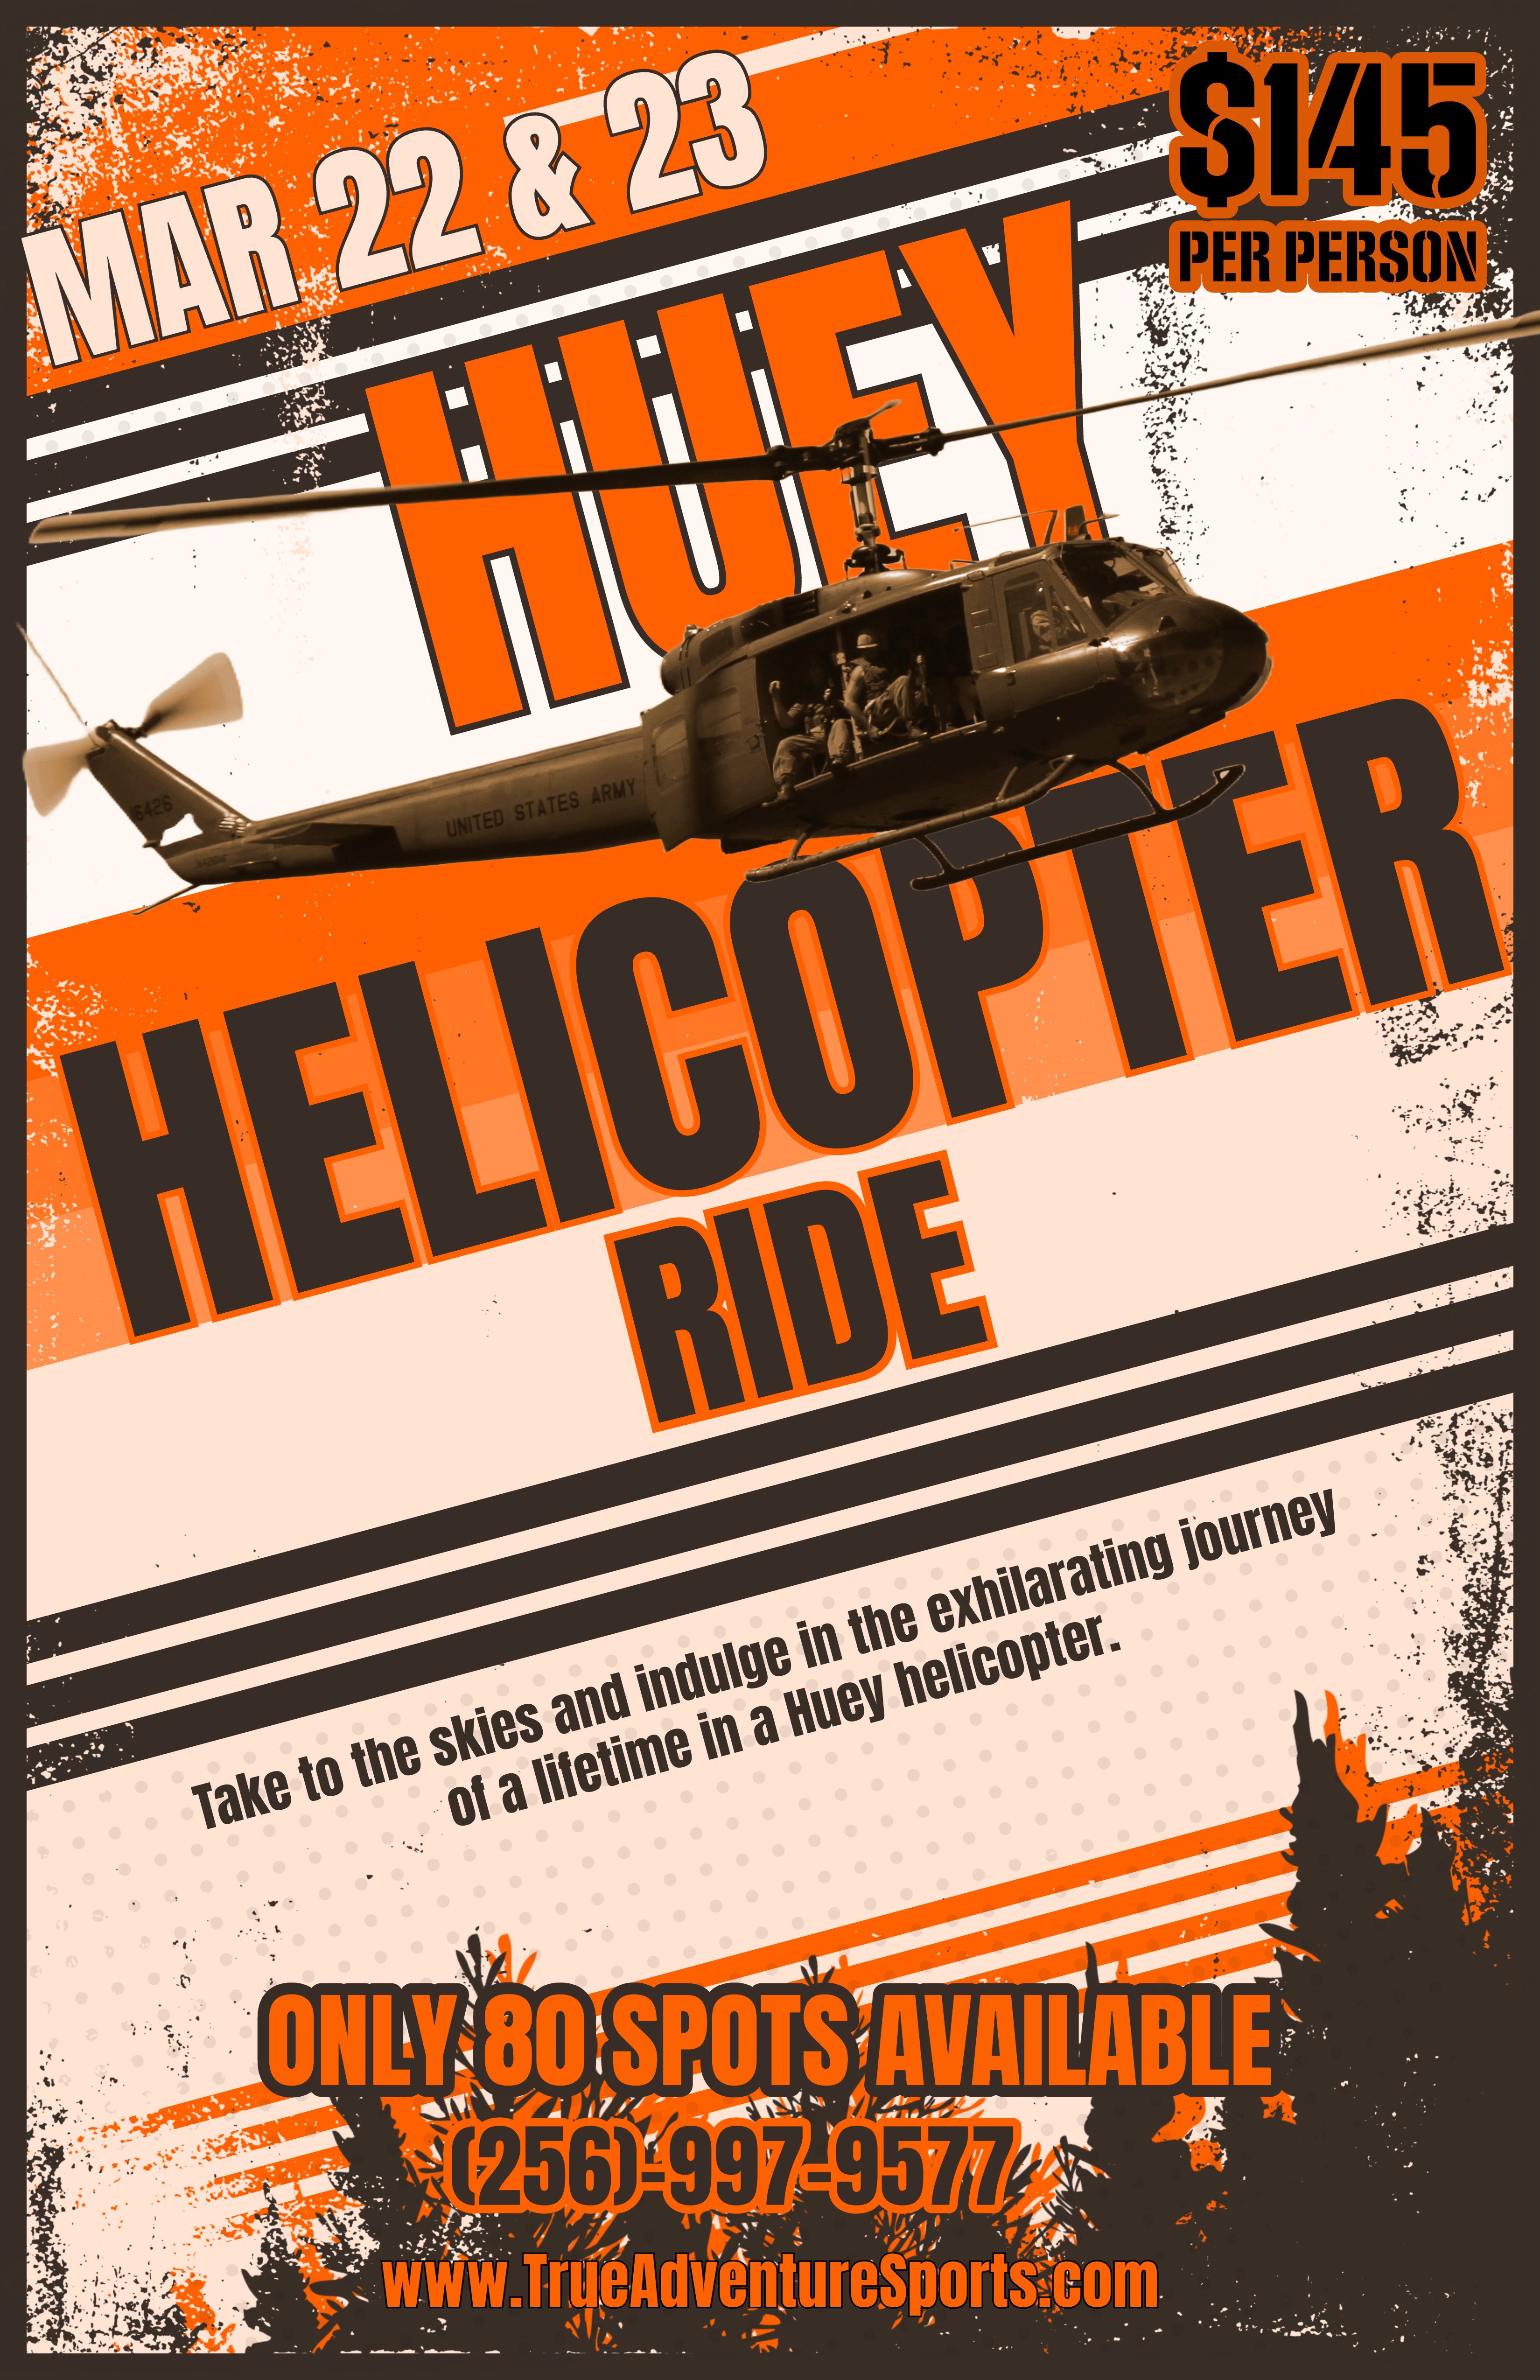 Huey Helicopter Rides